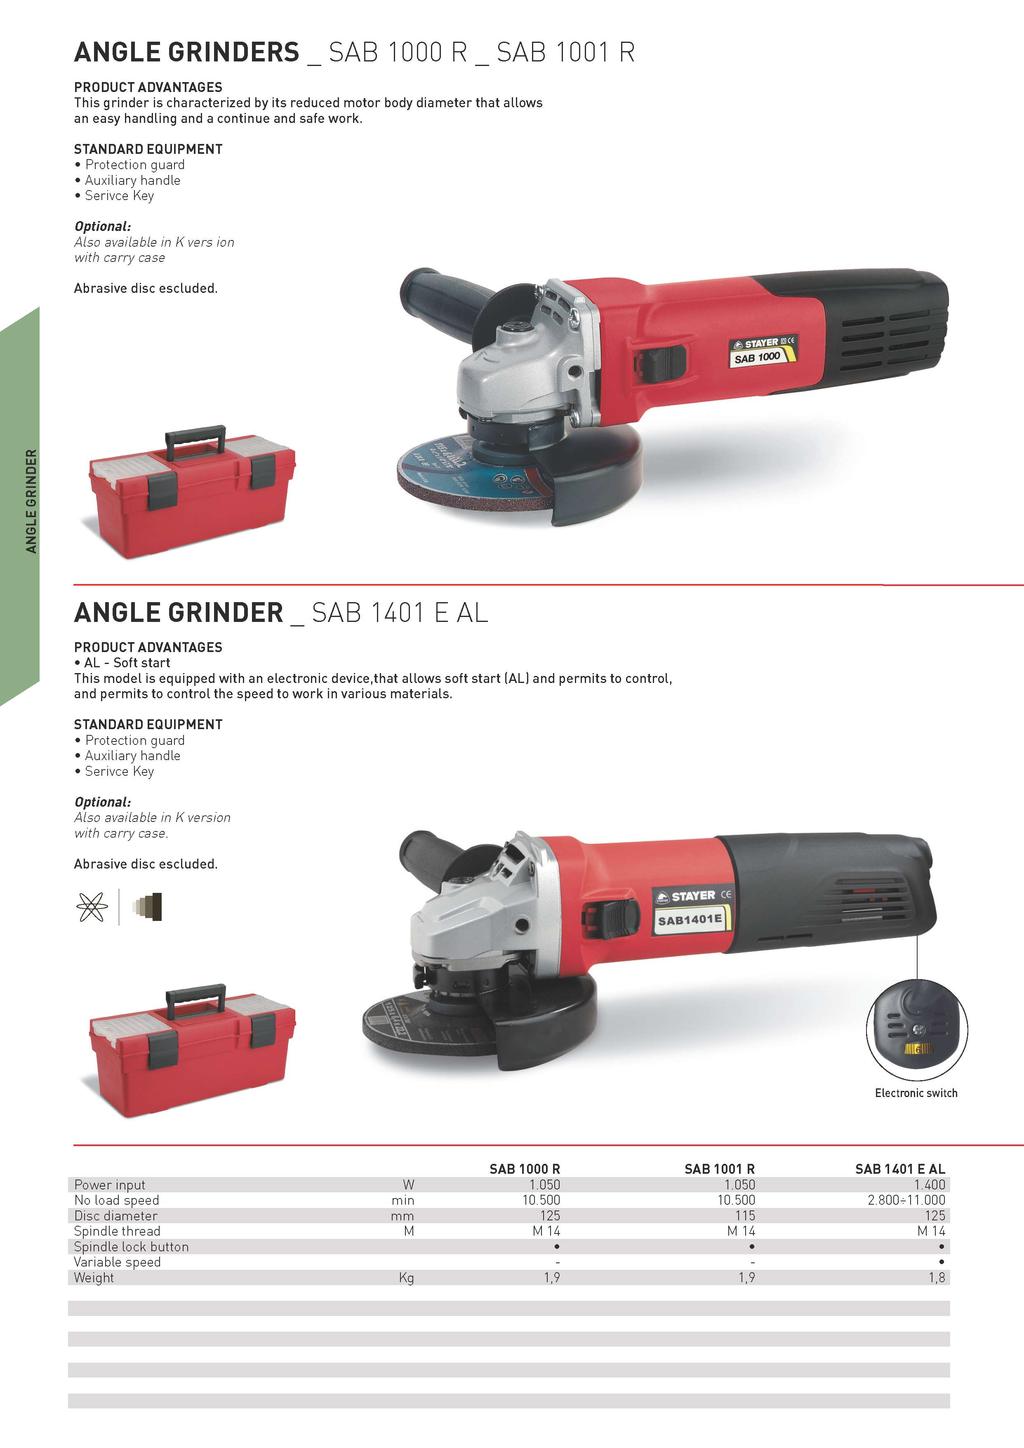 ANGLE GRINDERS _ SAB 1000 R _ SAB 1001 R This grinder is characterized by its reduced motor body diameter that allows an easy handling and a continue and safe work.